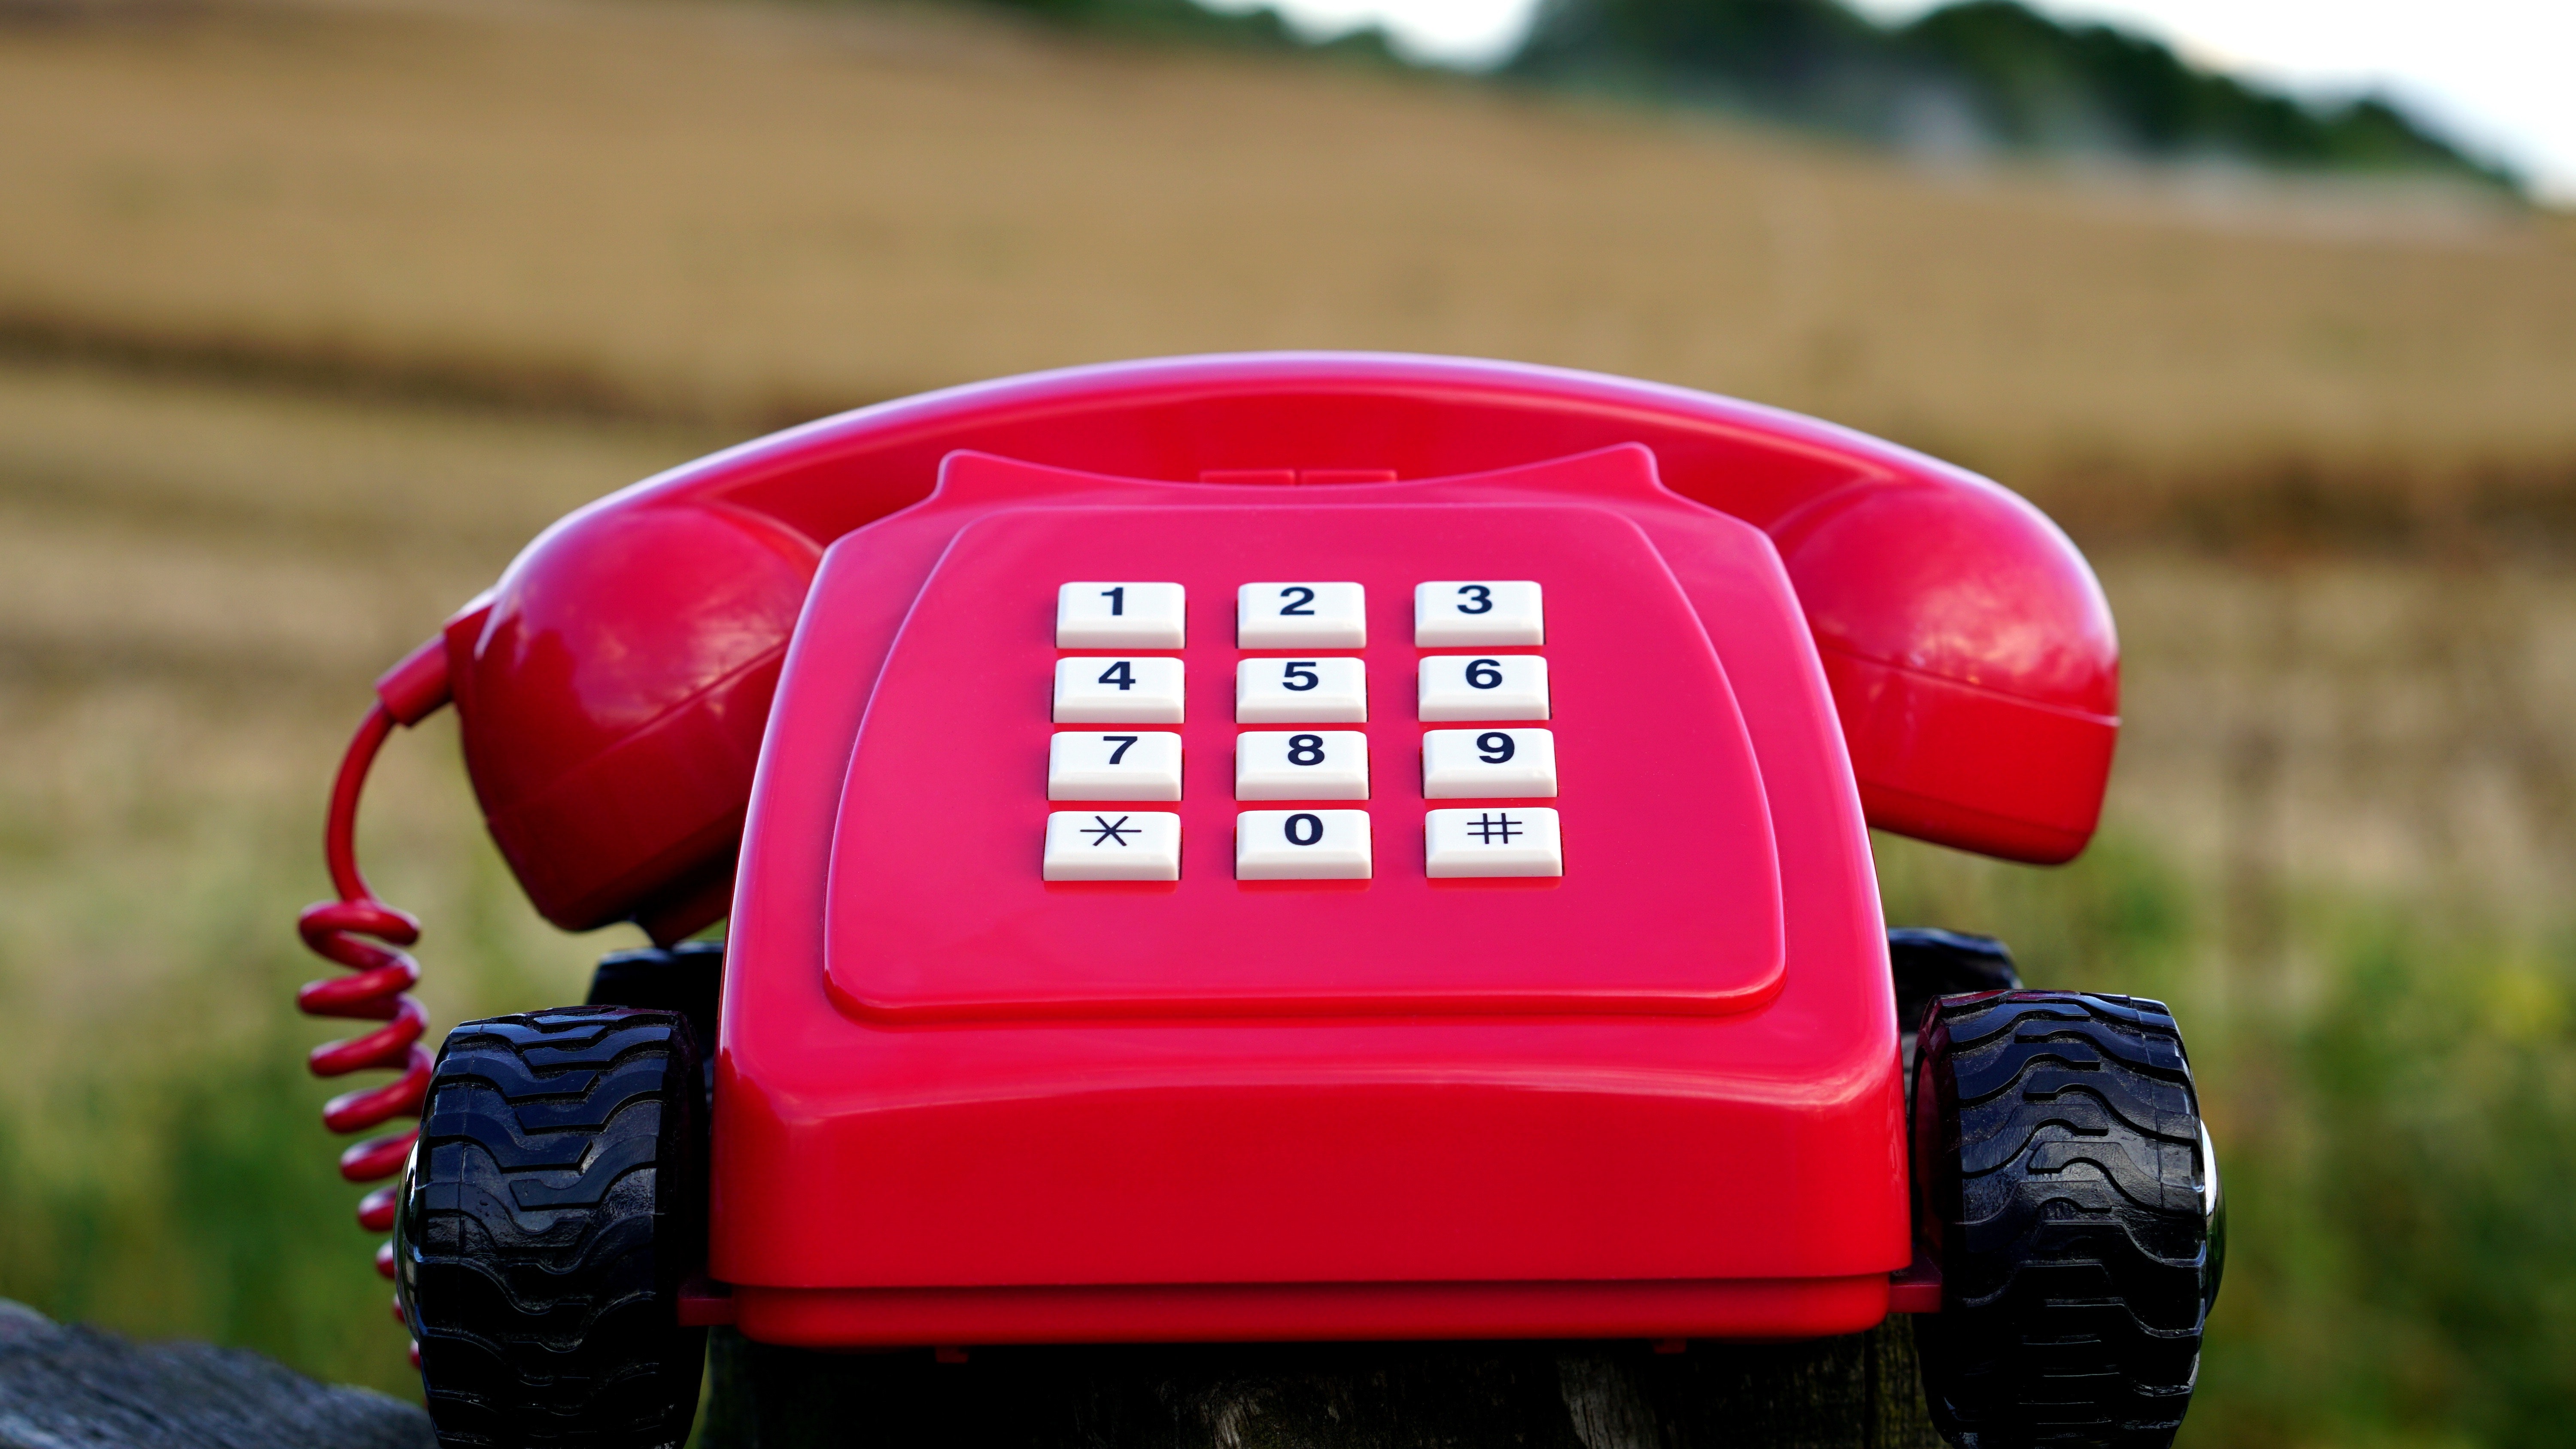 Red rotary phone with black wheels near brown grasses during day time photo